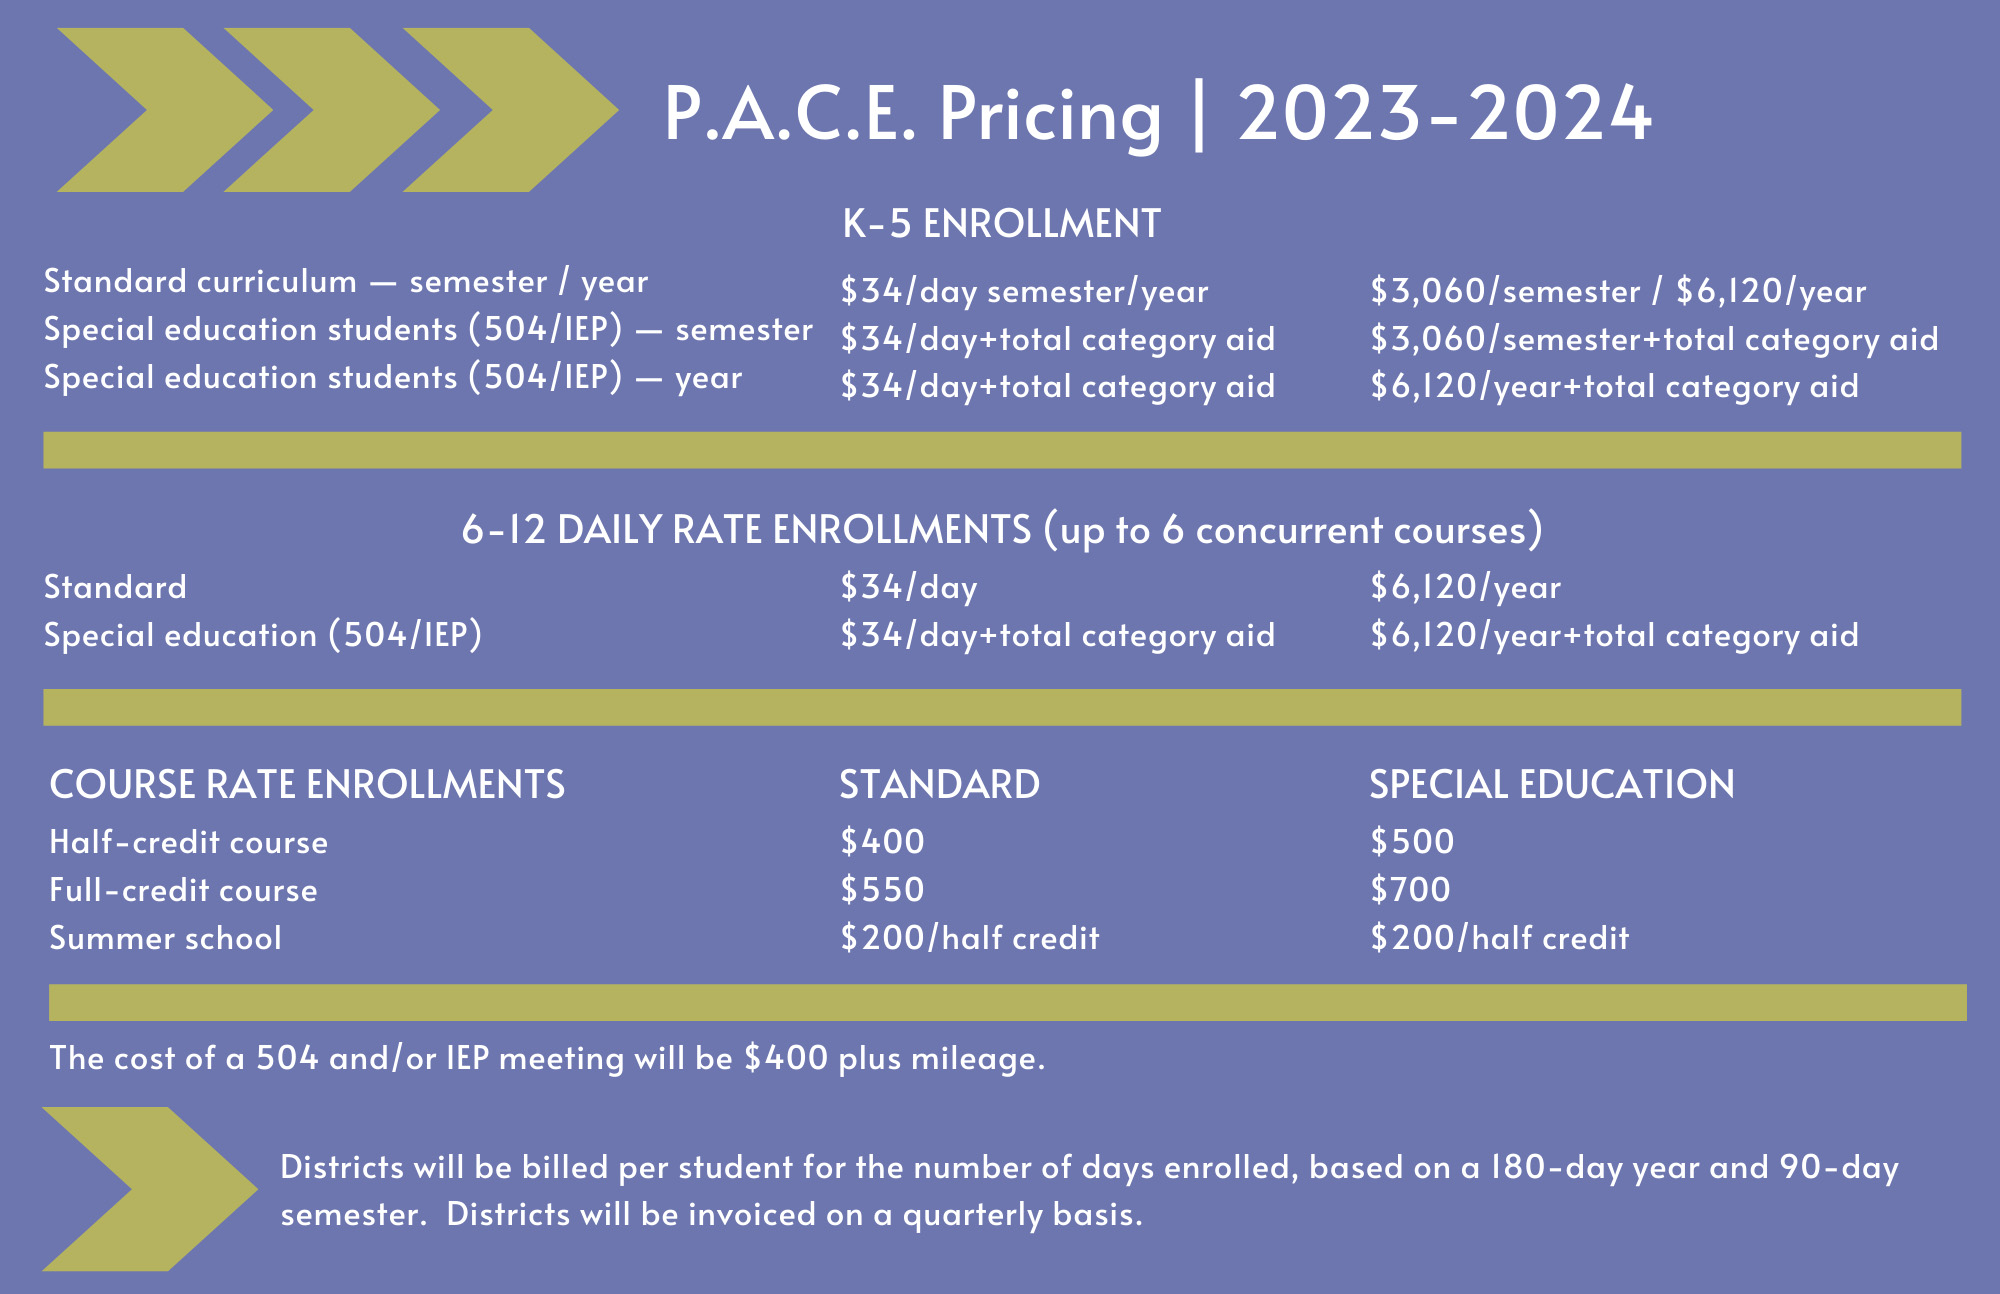 PACE pricing